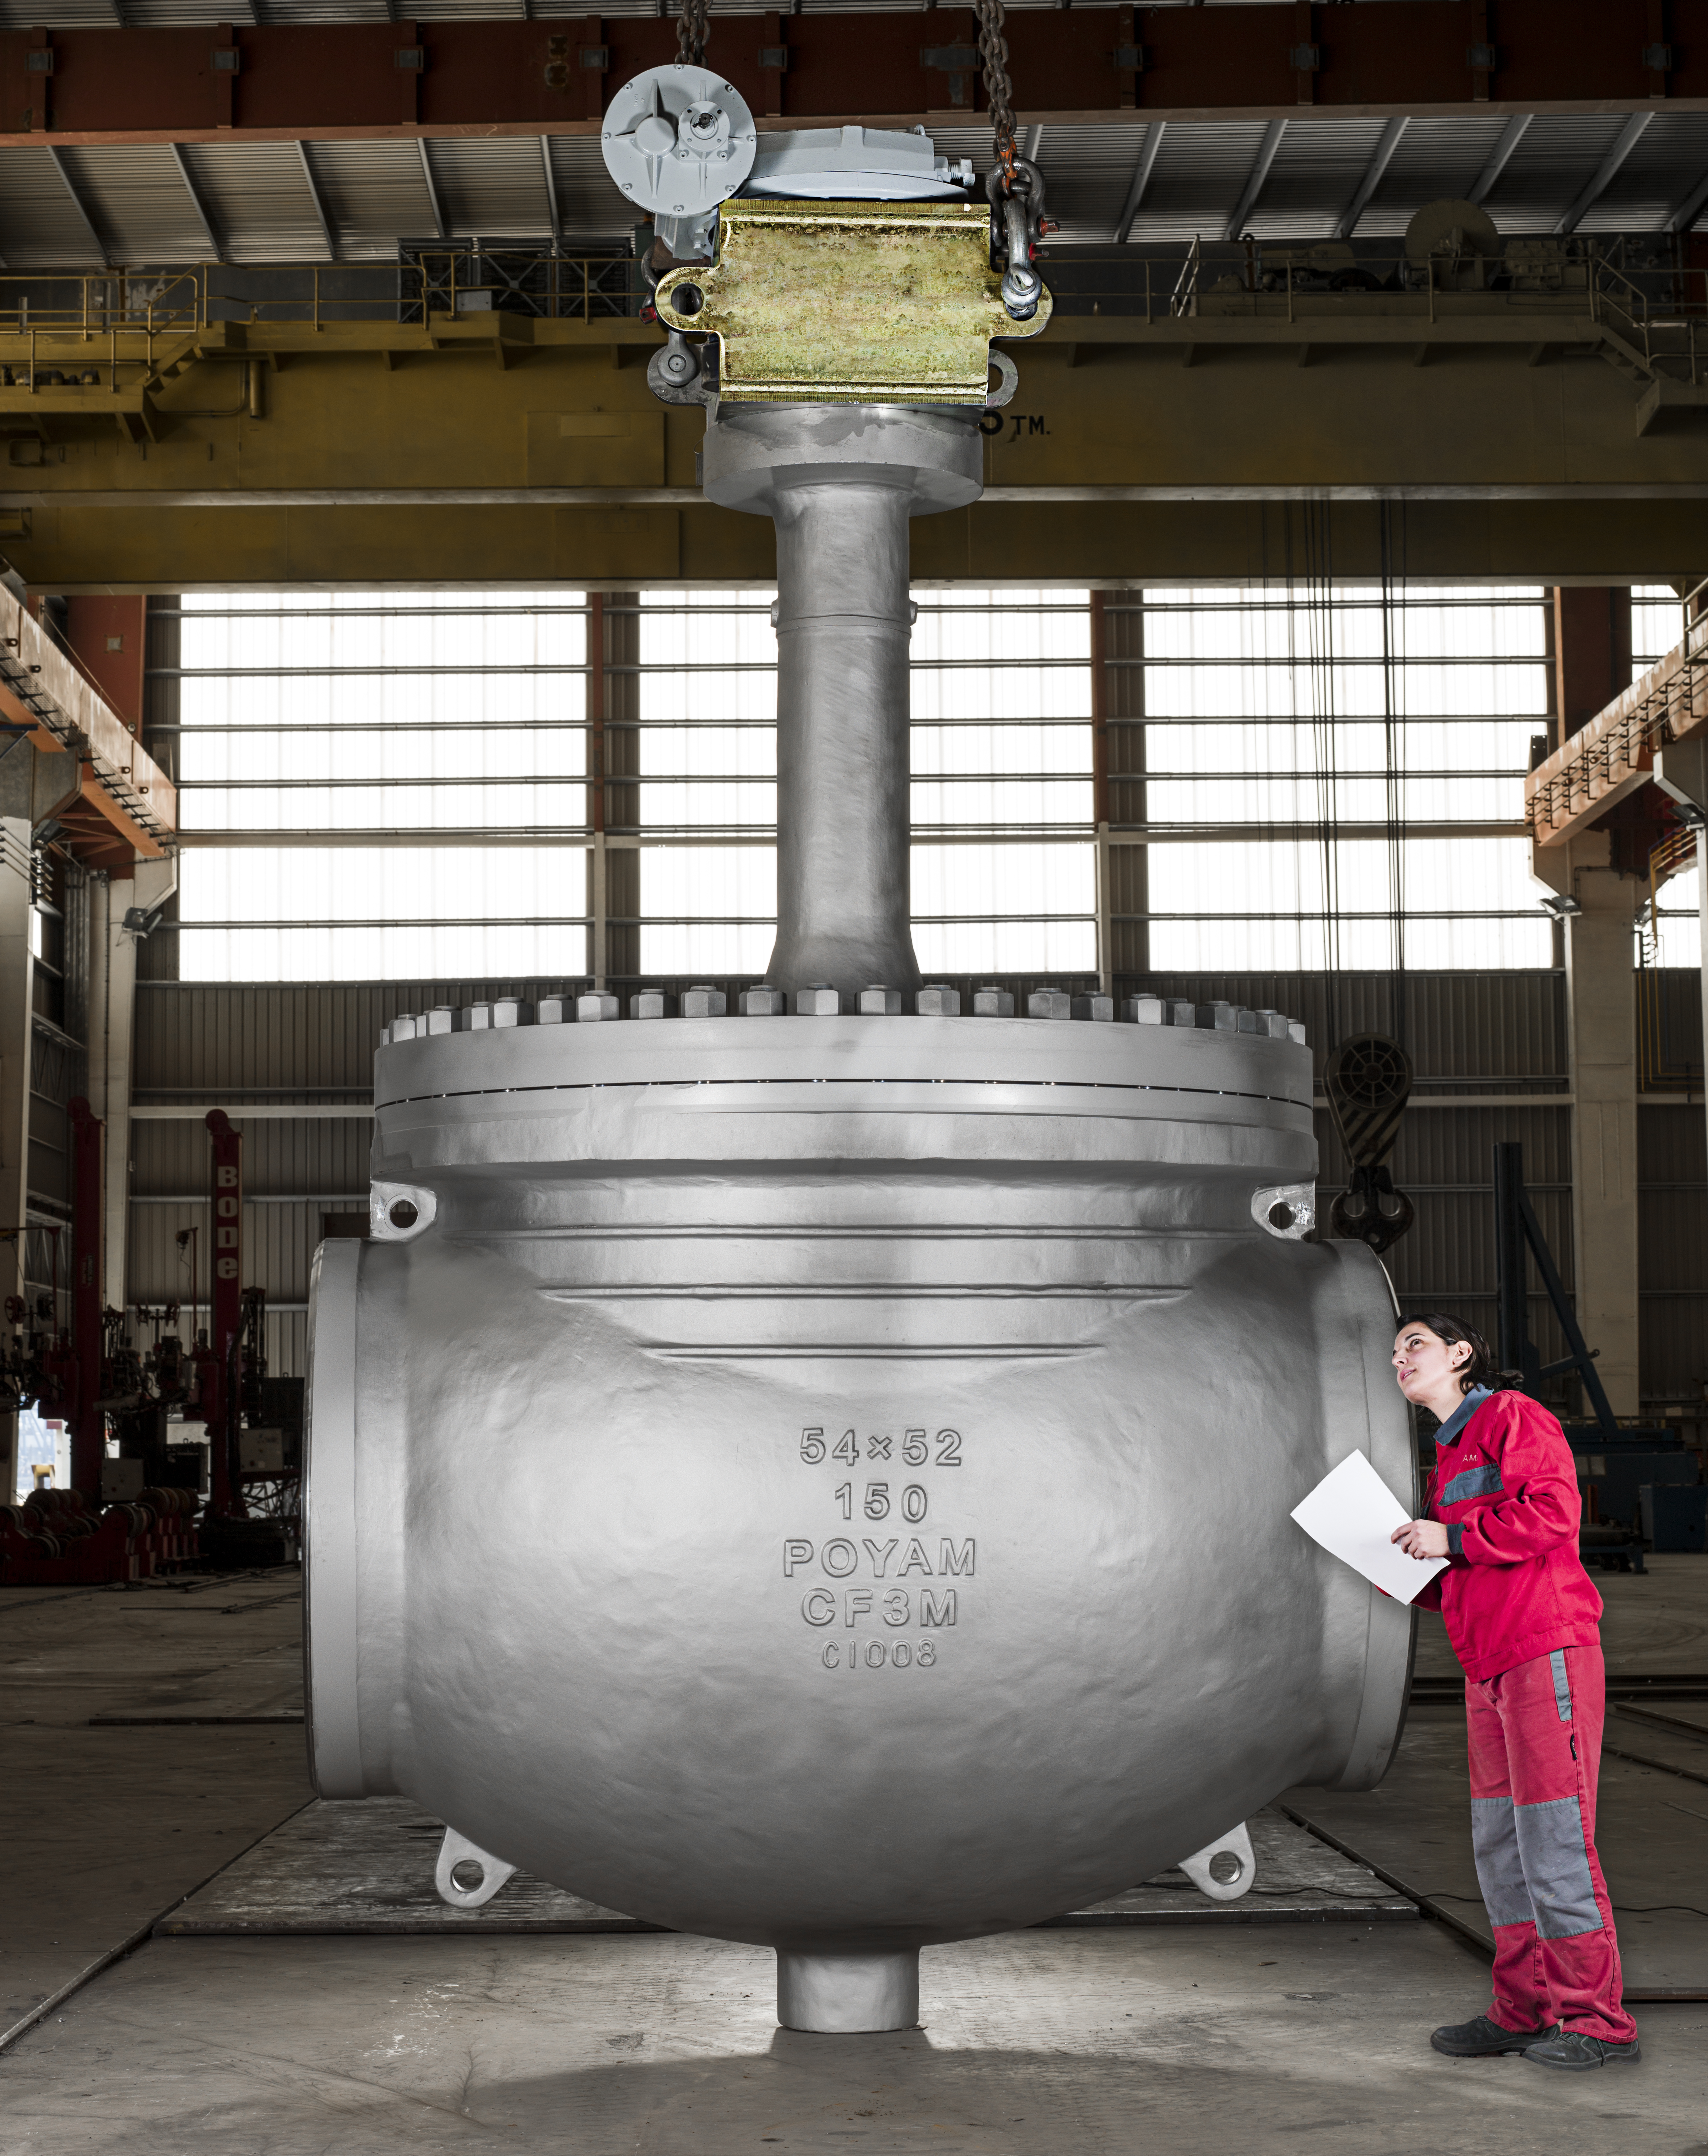  Cryogenic top entry ball valve. Credit: AMPO